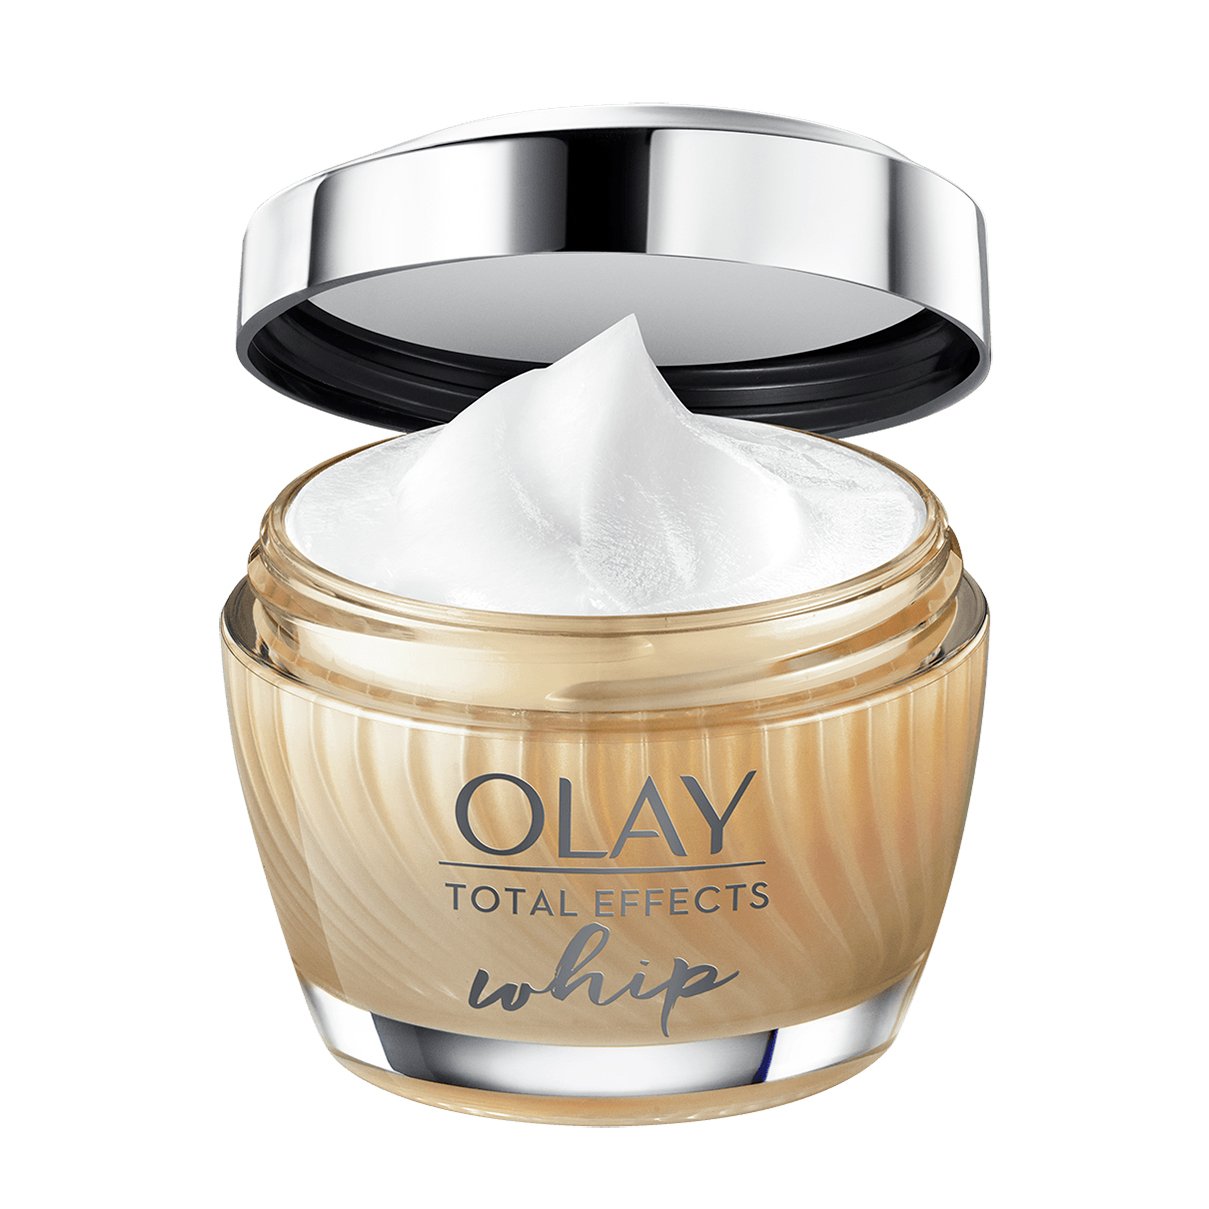 Olay Total Effects Whip Cream - 50ml